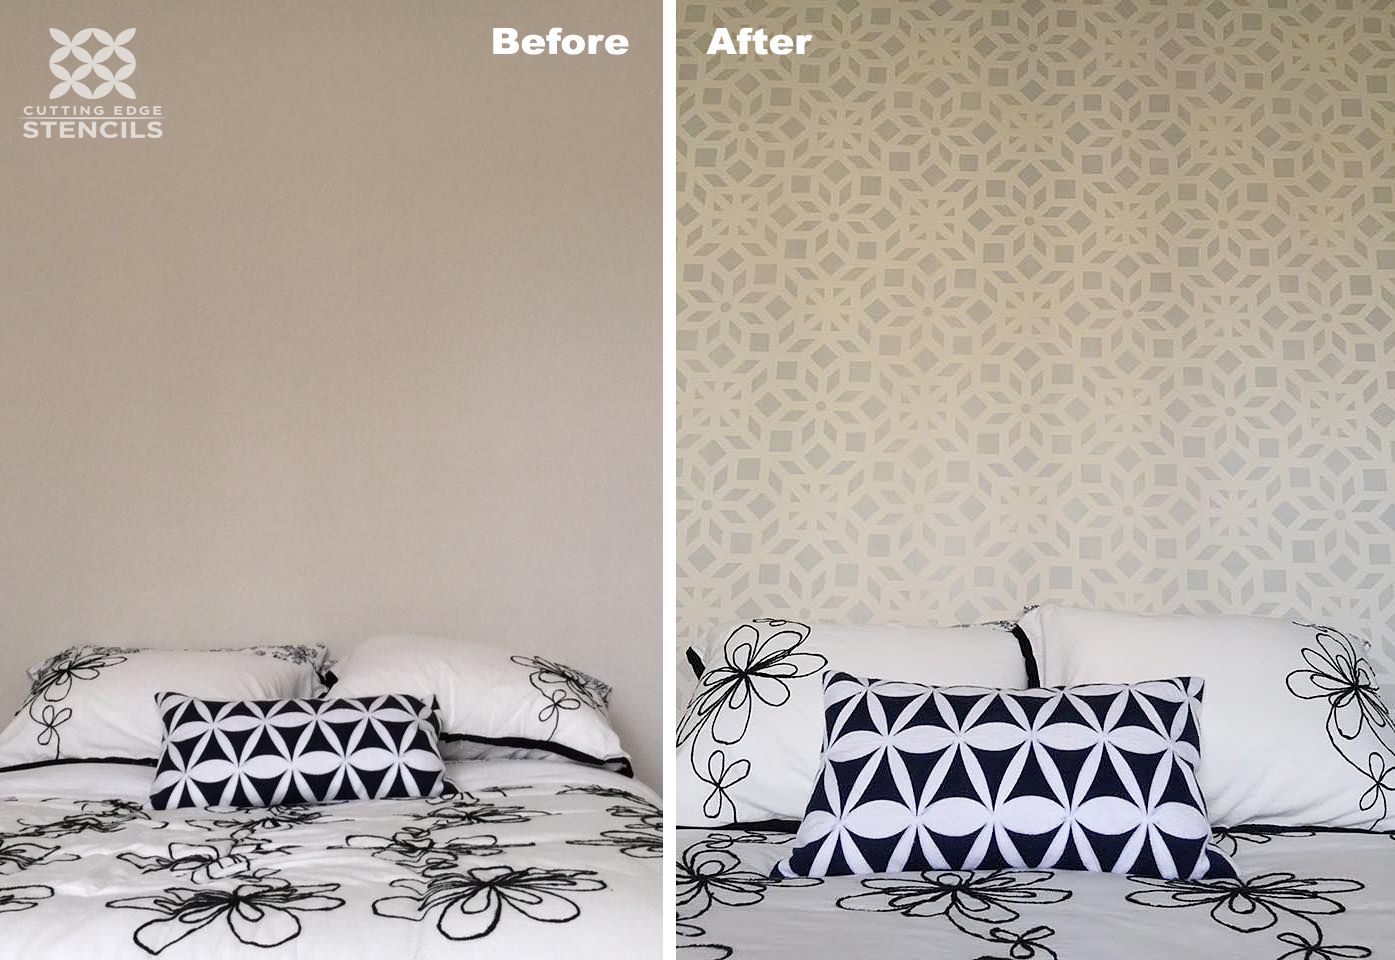 A before and after of a stenciled bedroom accent wall using the Kerala Allover Stencil, an Indian inspired wallpaper pattern, from Cutting Edge Stencils. http://www.cuttingedgestencils.com/kerala-indian-stencil-geometric-pattern-stencils.html